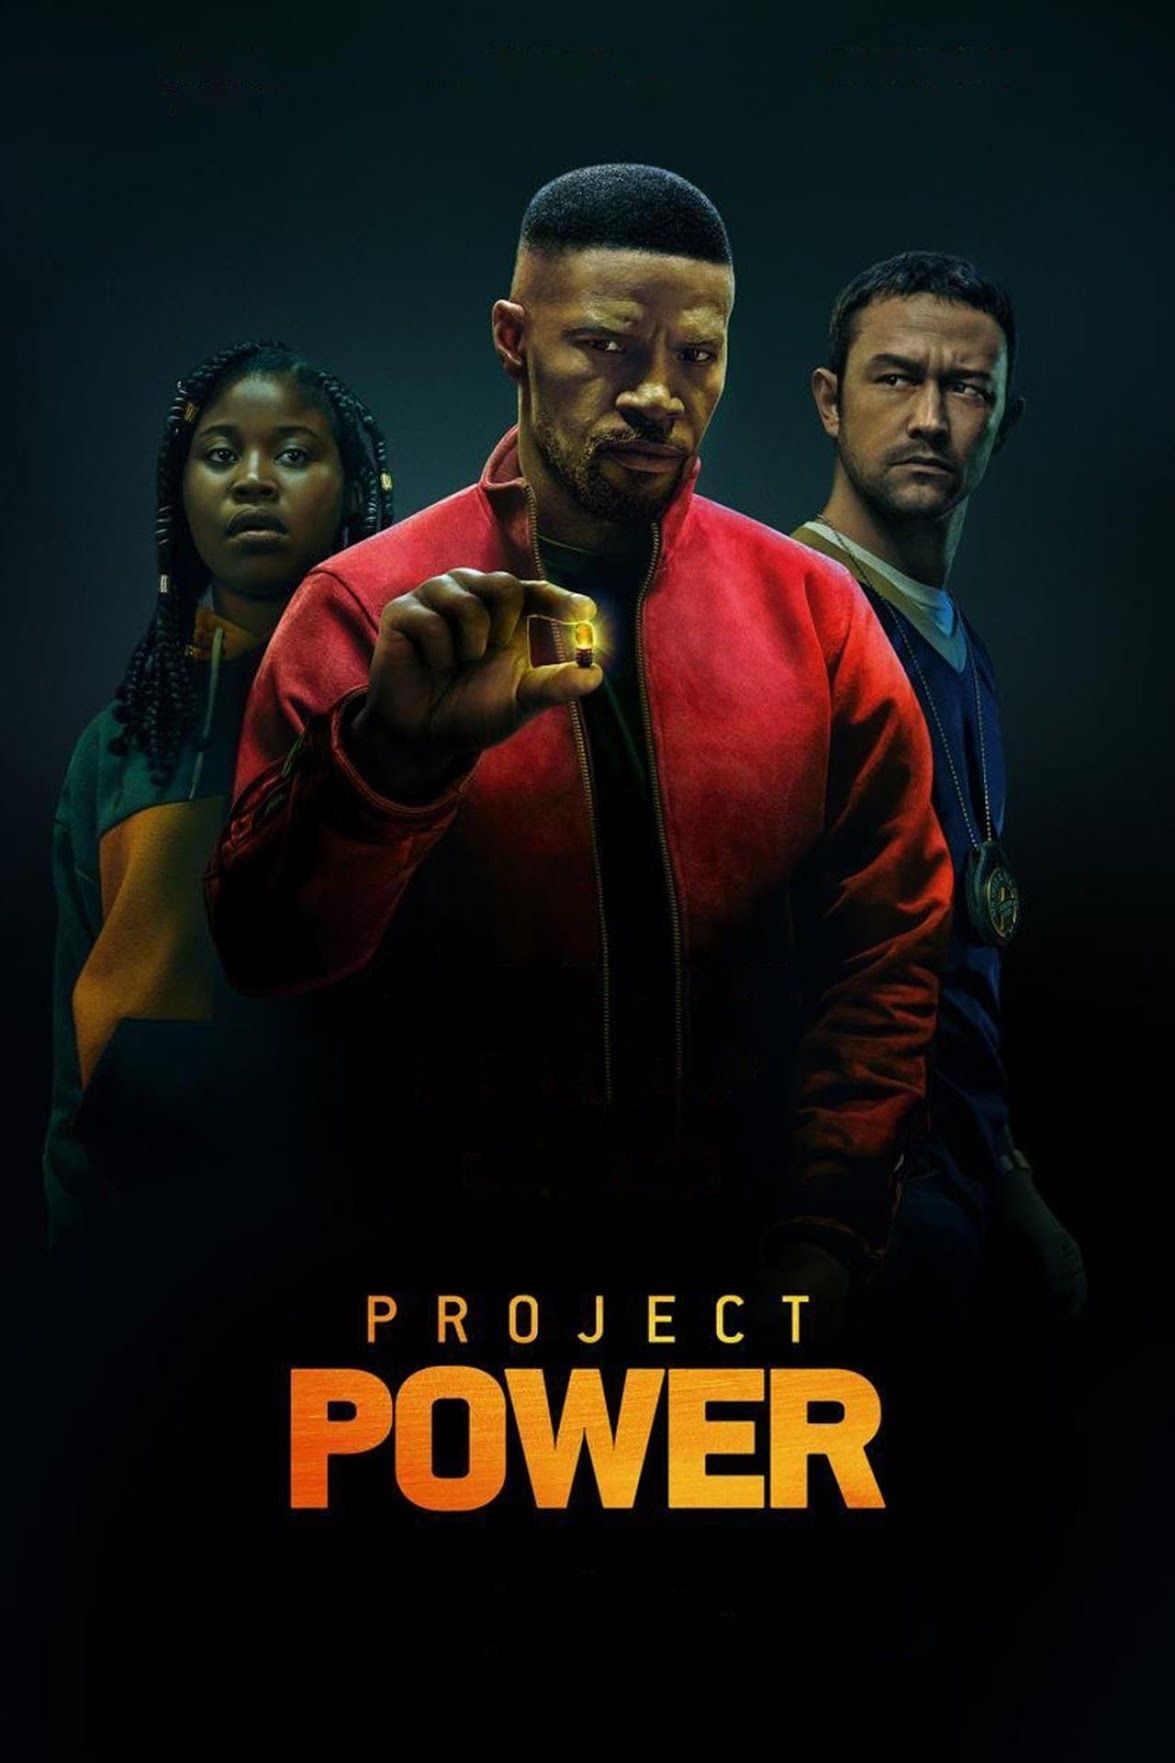 Project Power (2020) Hindi Dubbed BluRay download full movie